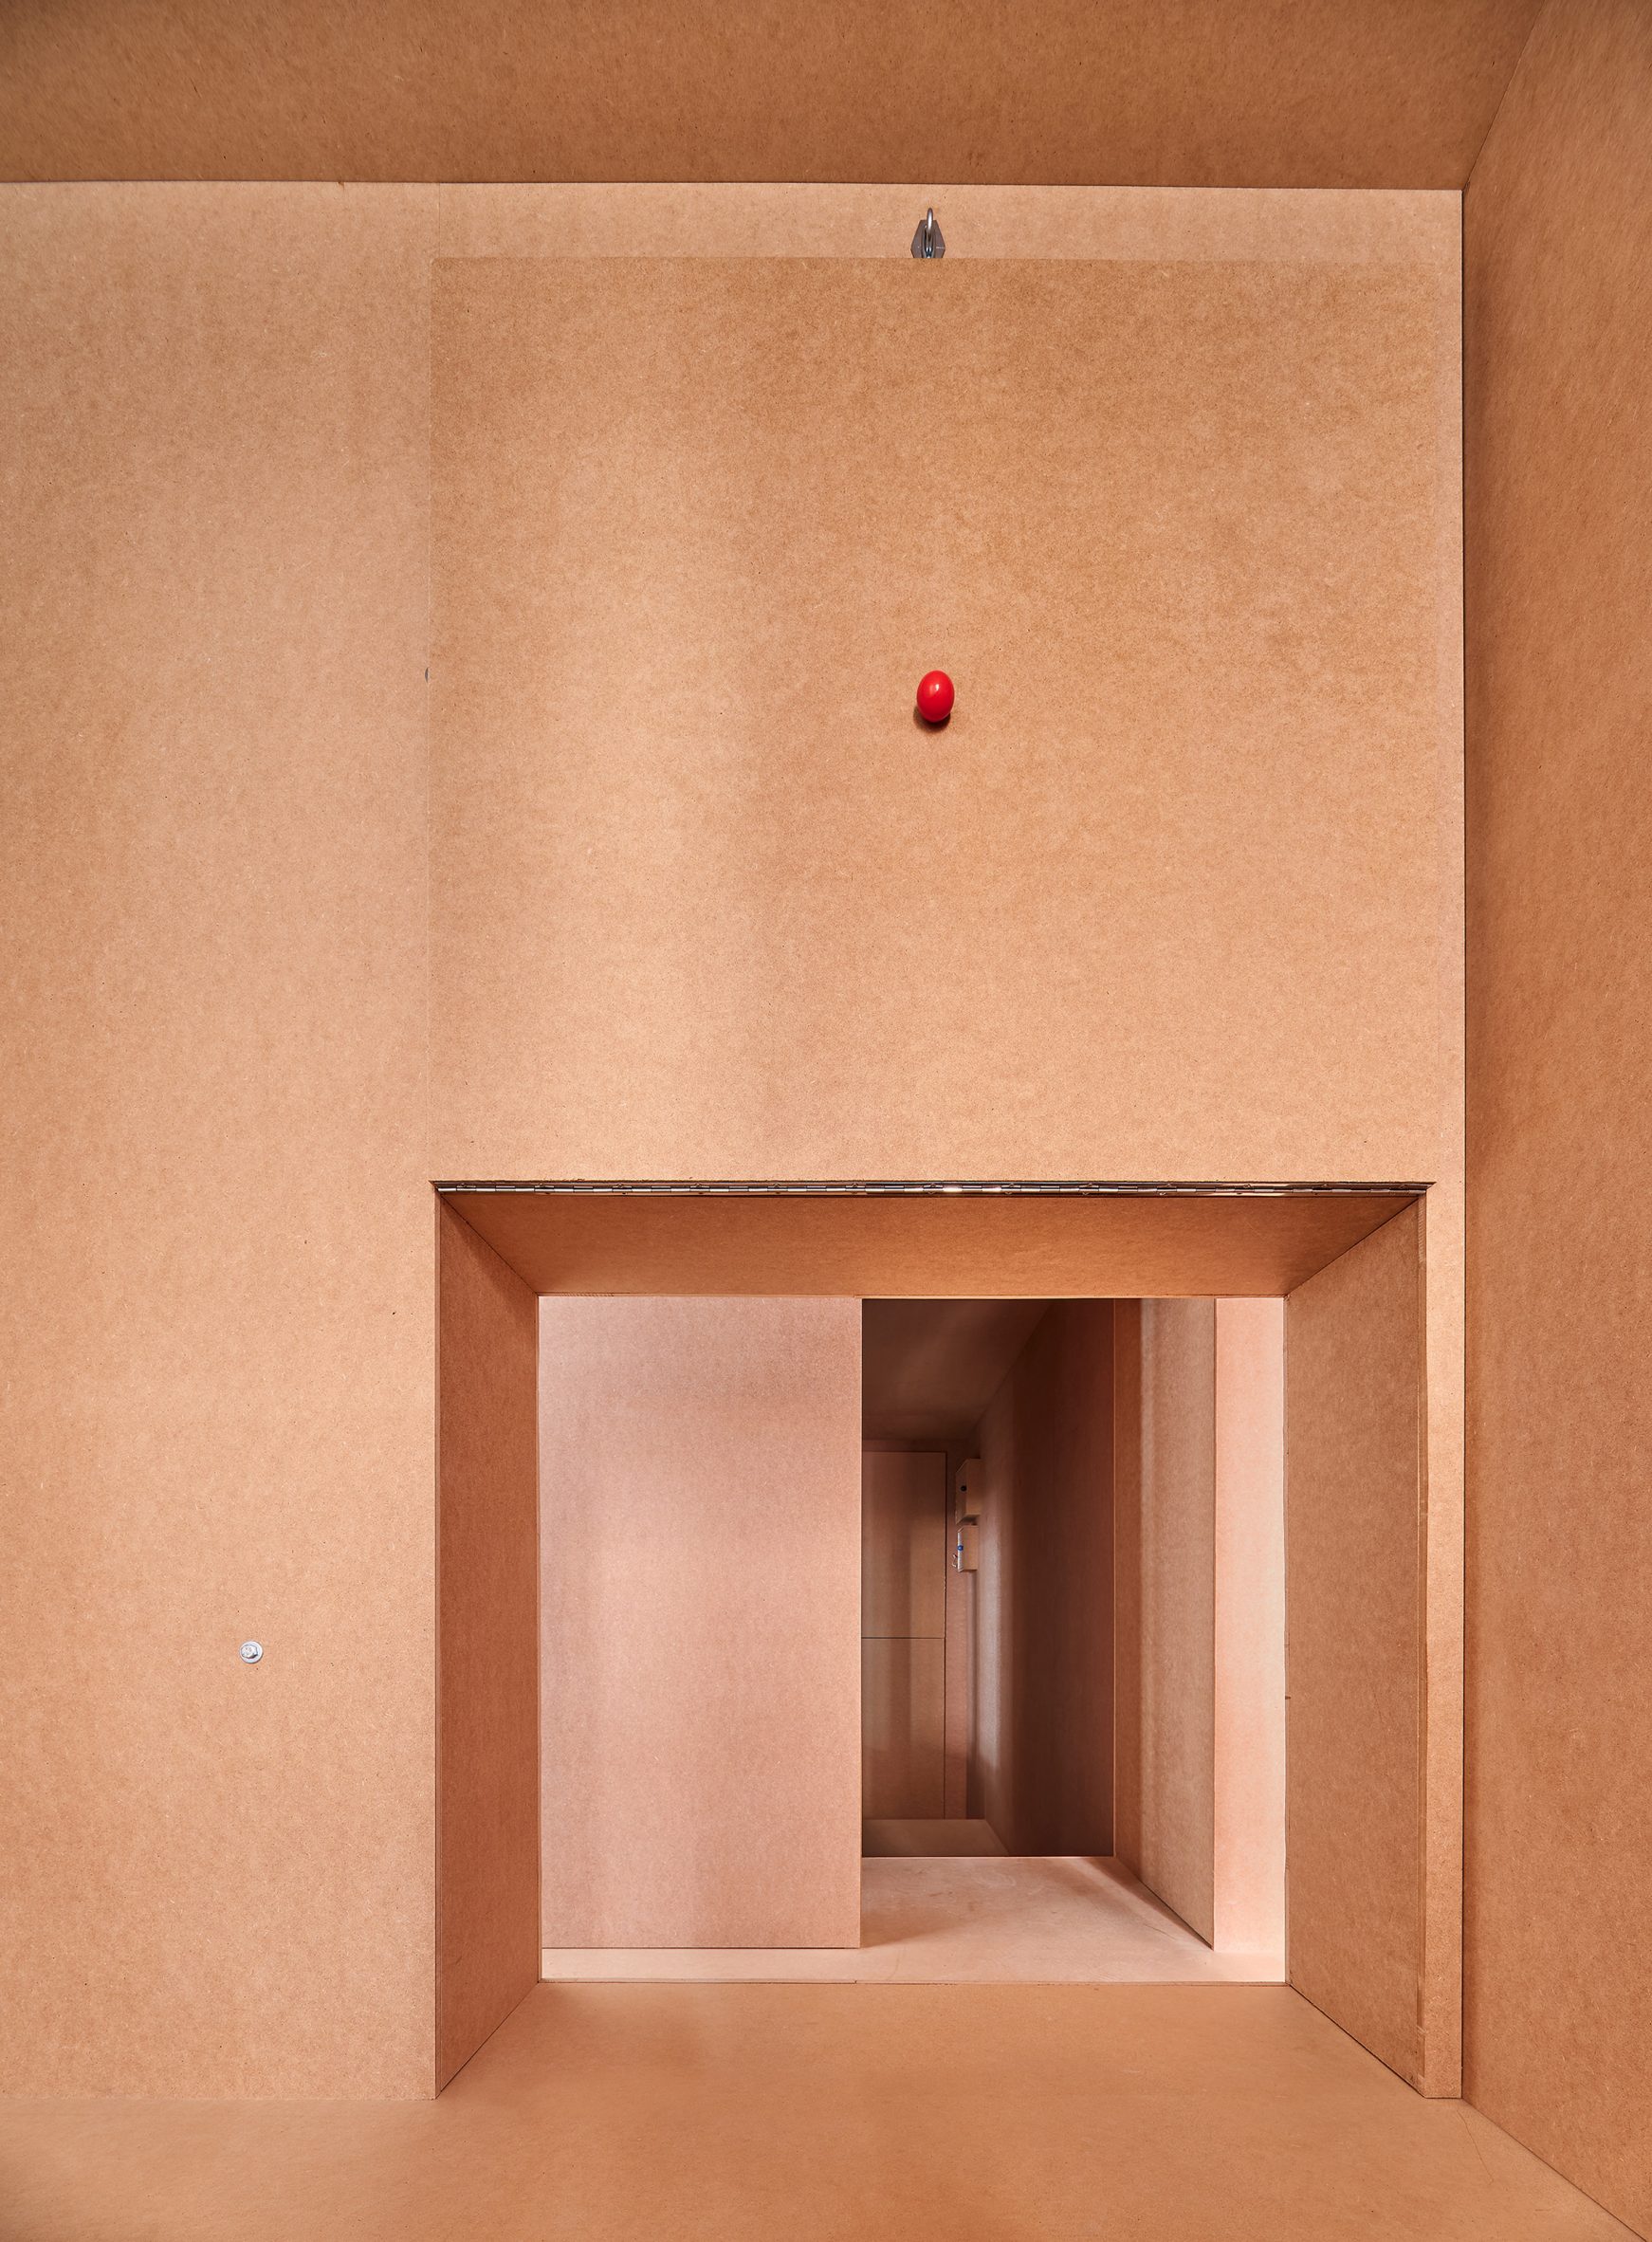 Boxy rooms created from CNC-milled MDF slabs